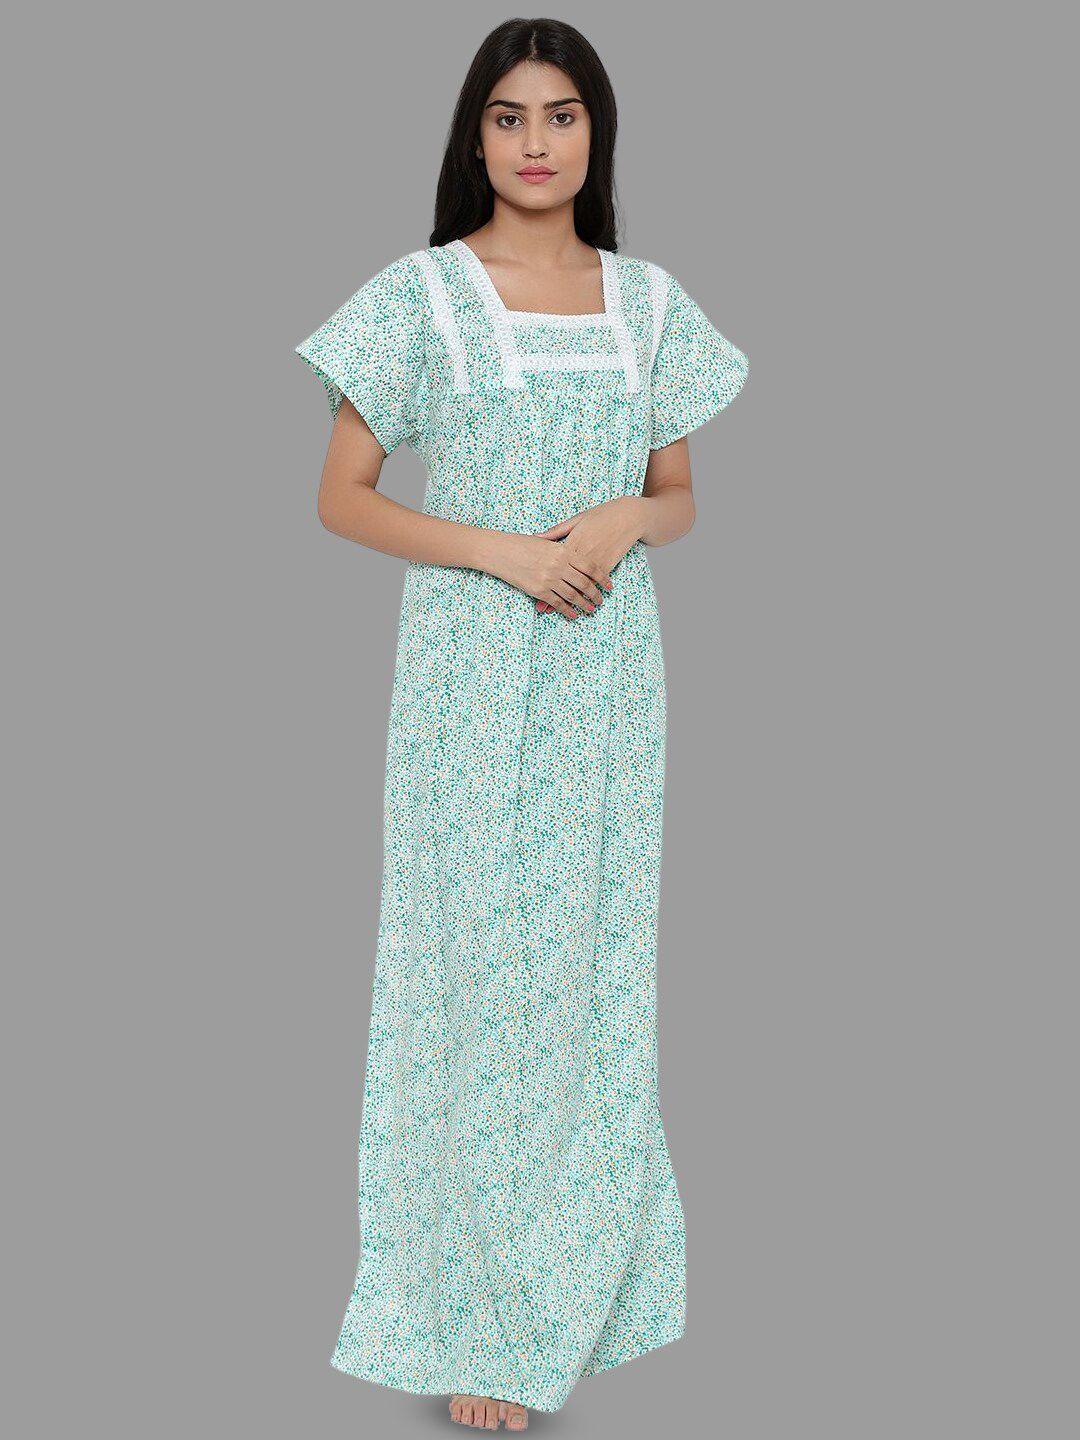 palival floral printed pure cotton maxi nightdress